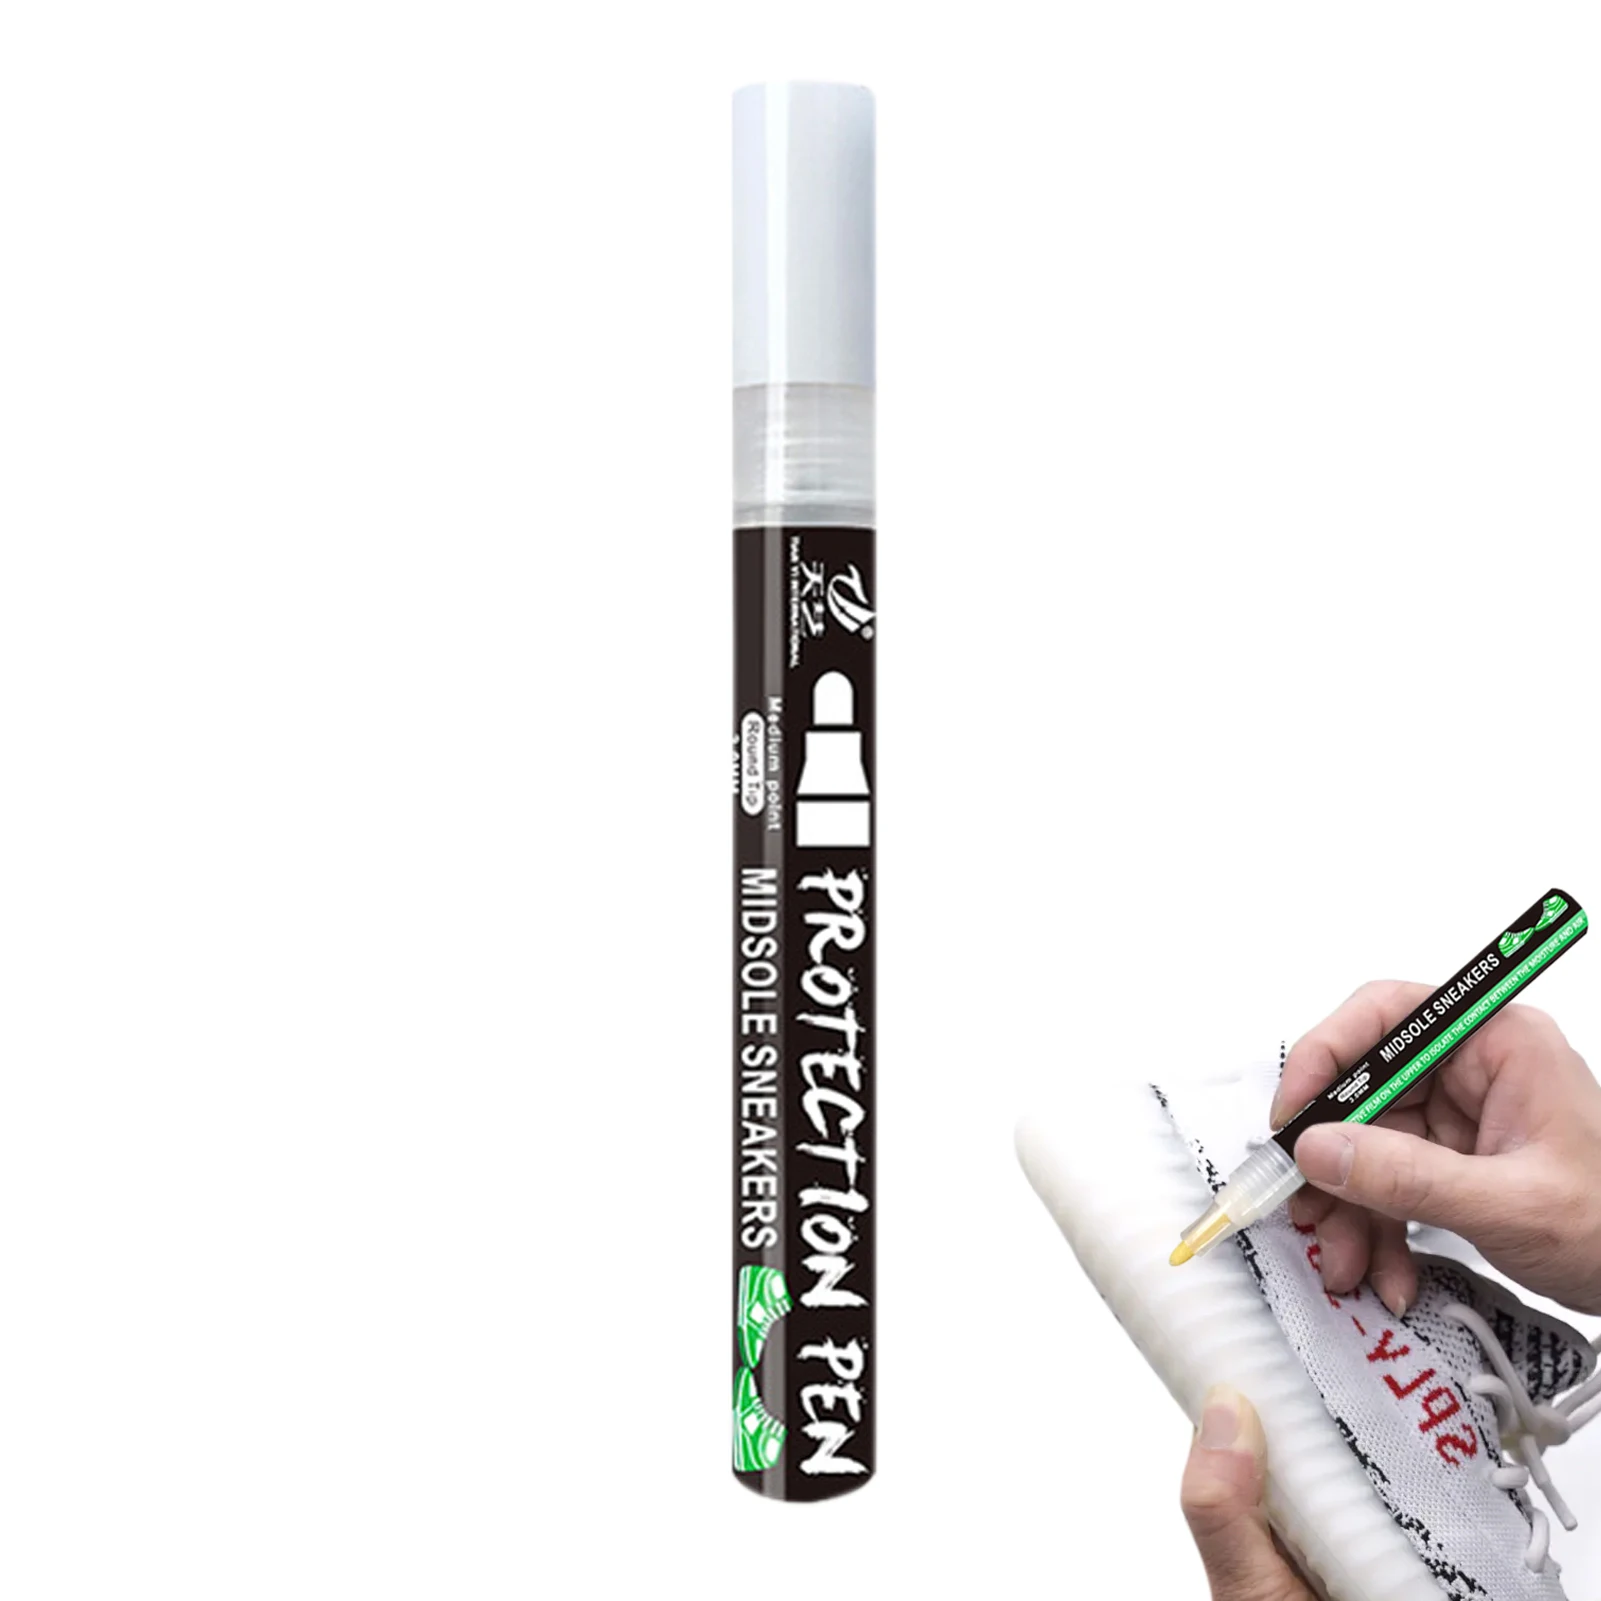 Trainer Shoe Paint Pen WHITE & BLACK KIT for Trainers Shoes Sneakers Whitener 